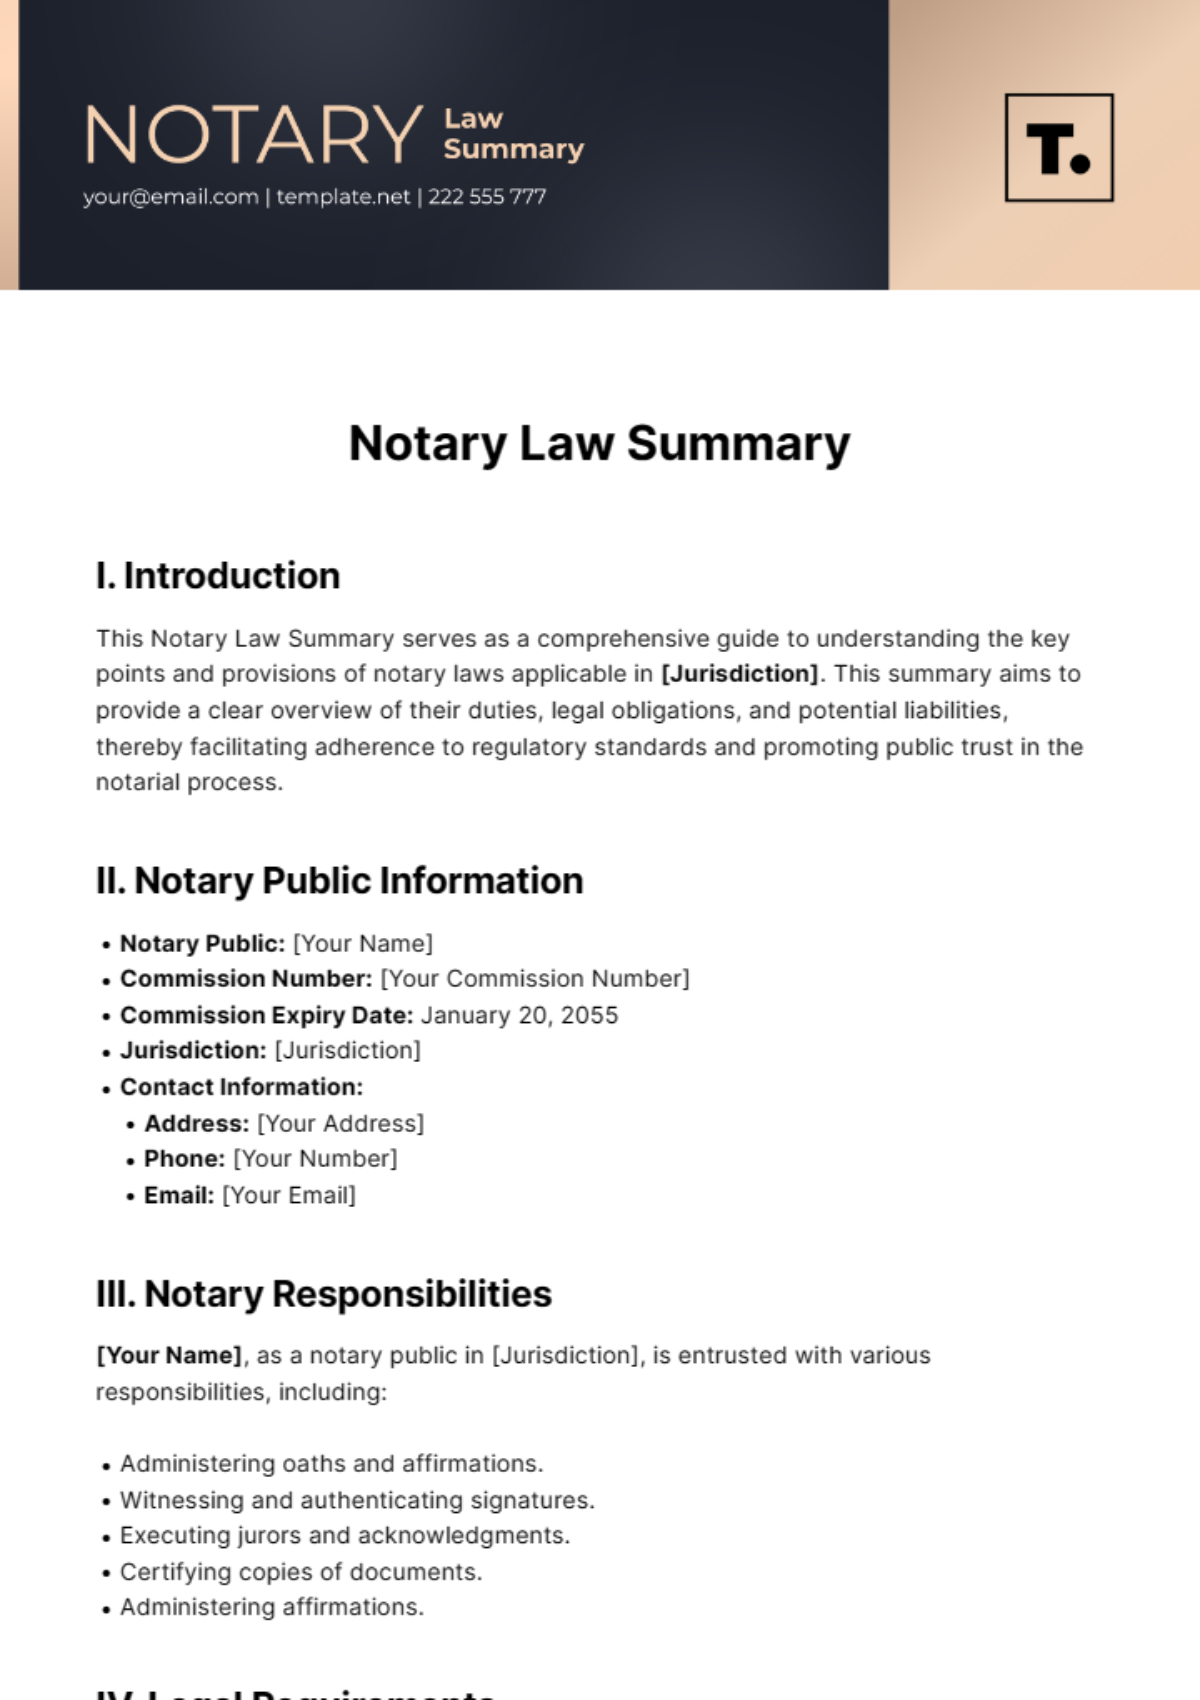 Notary Law Summary Template